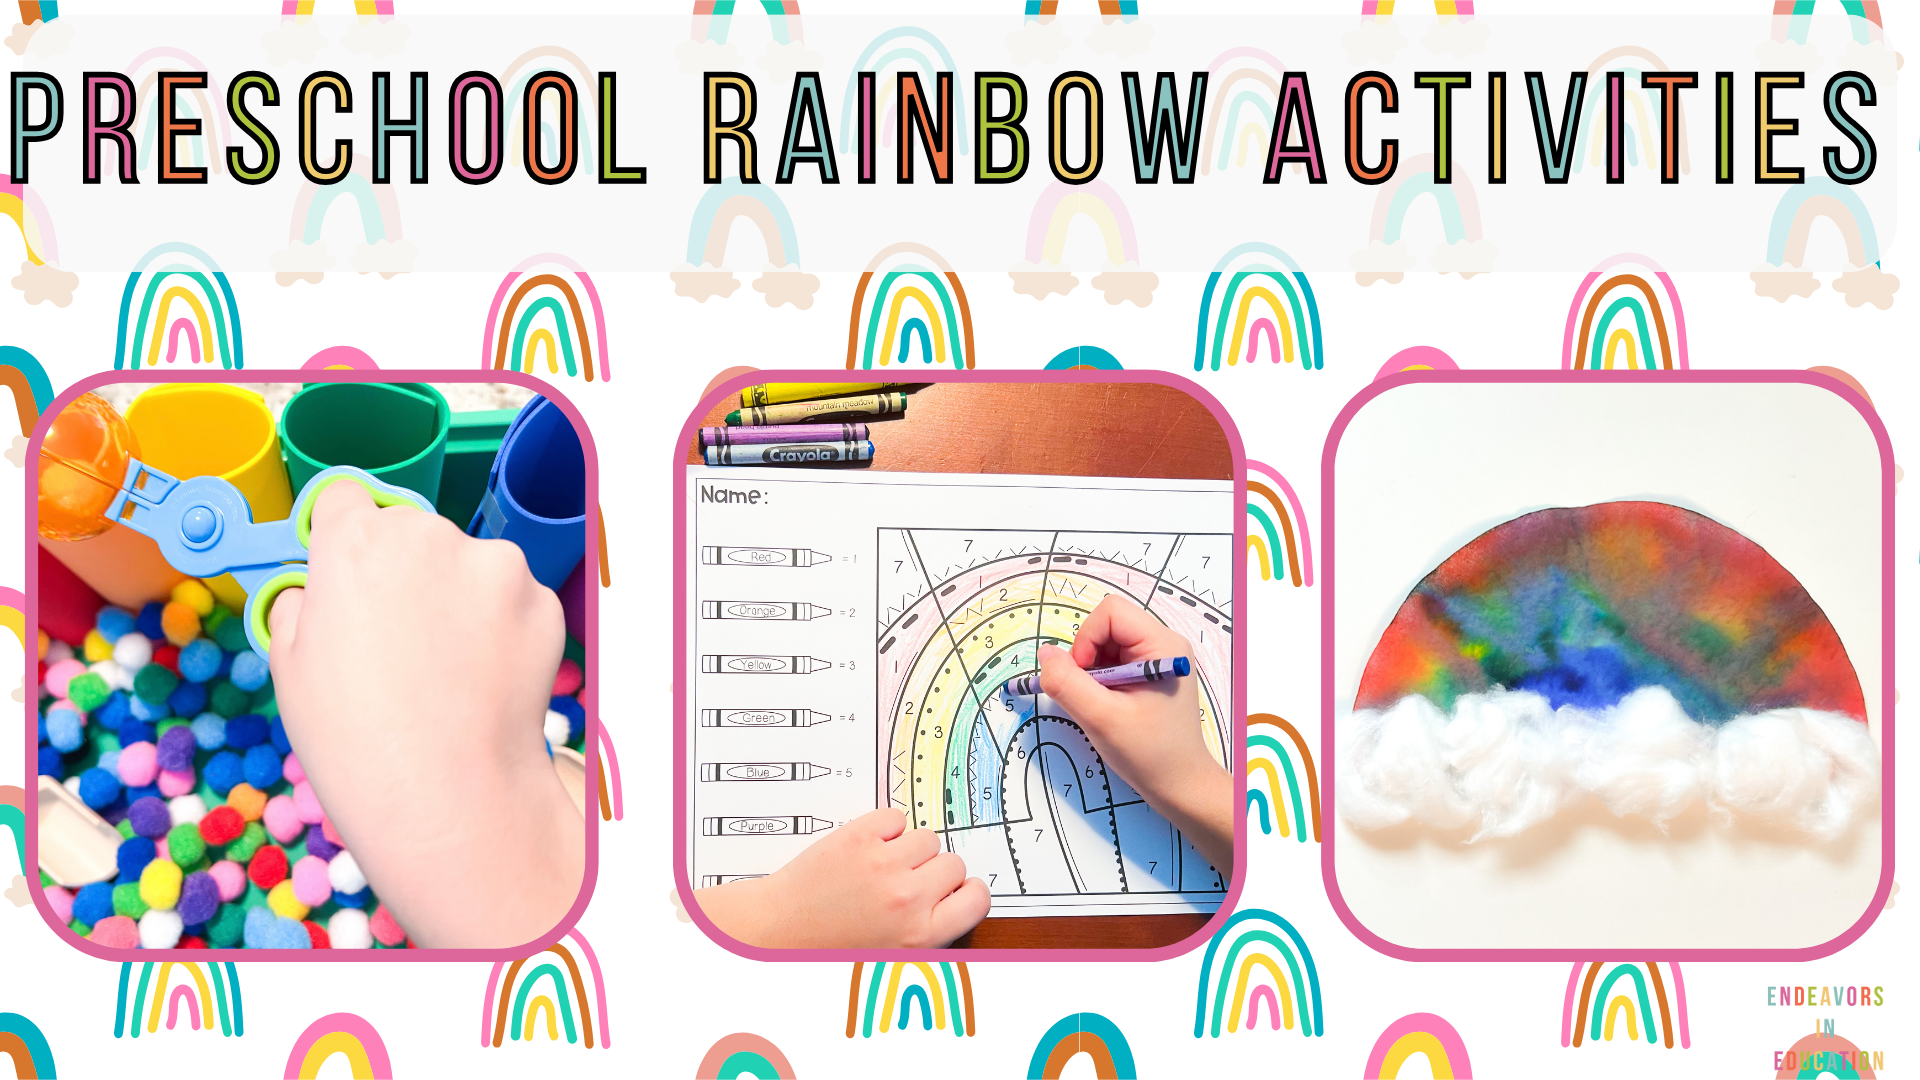 Image says preschool rainbow activities at the top and there are three pictures across the header. The first is a rainbow sensory bin. The second is a rainbow color by code. The third image is a coffee filter rainbow.